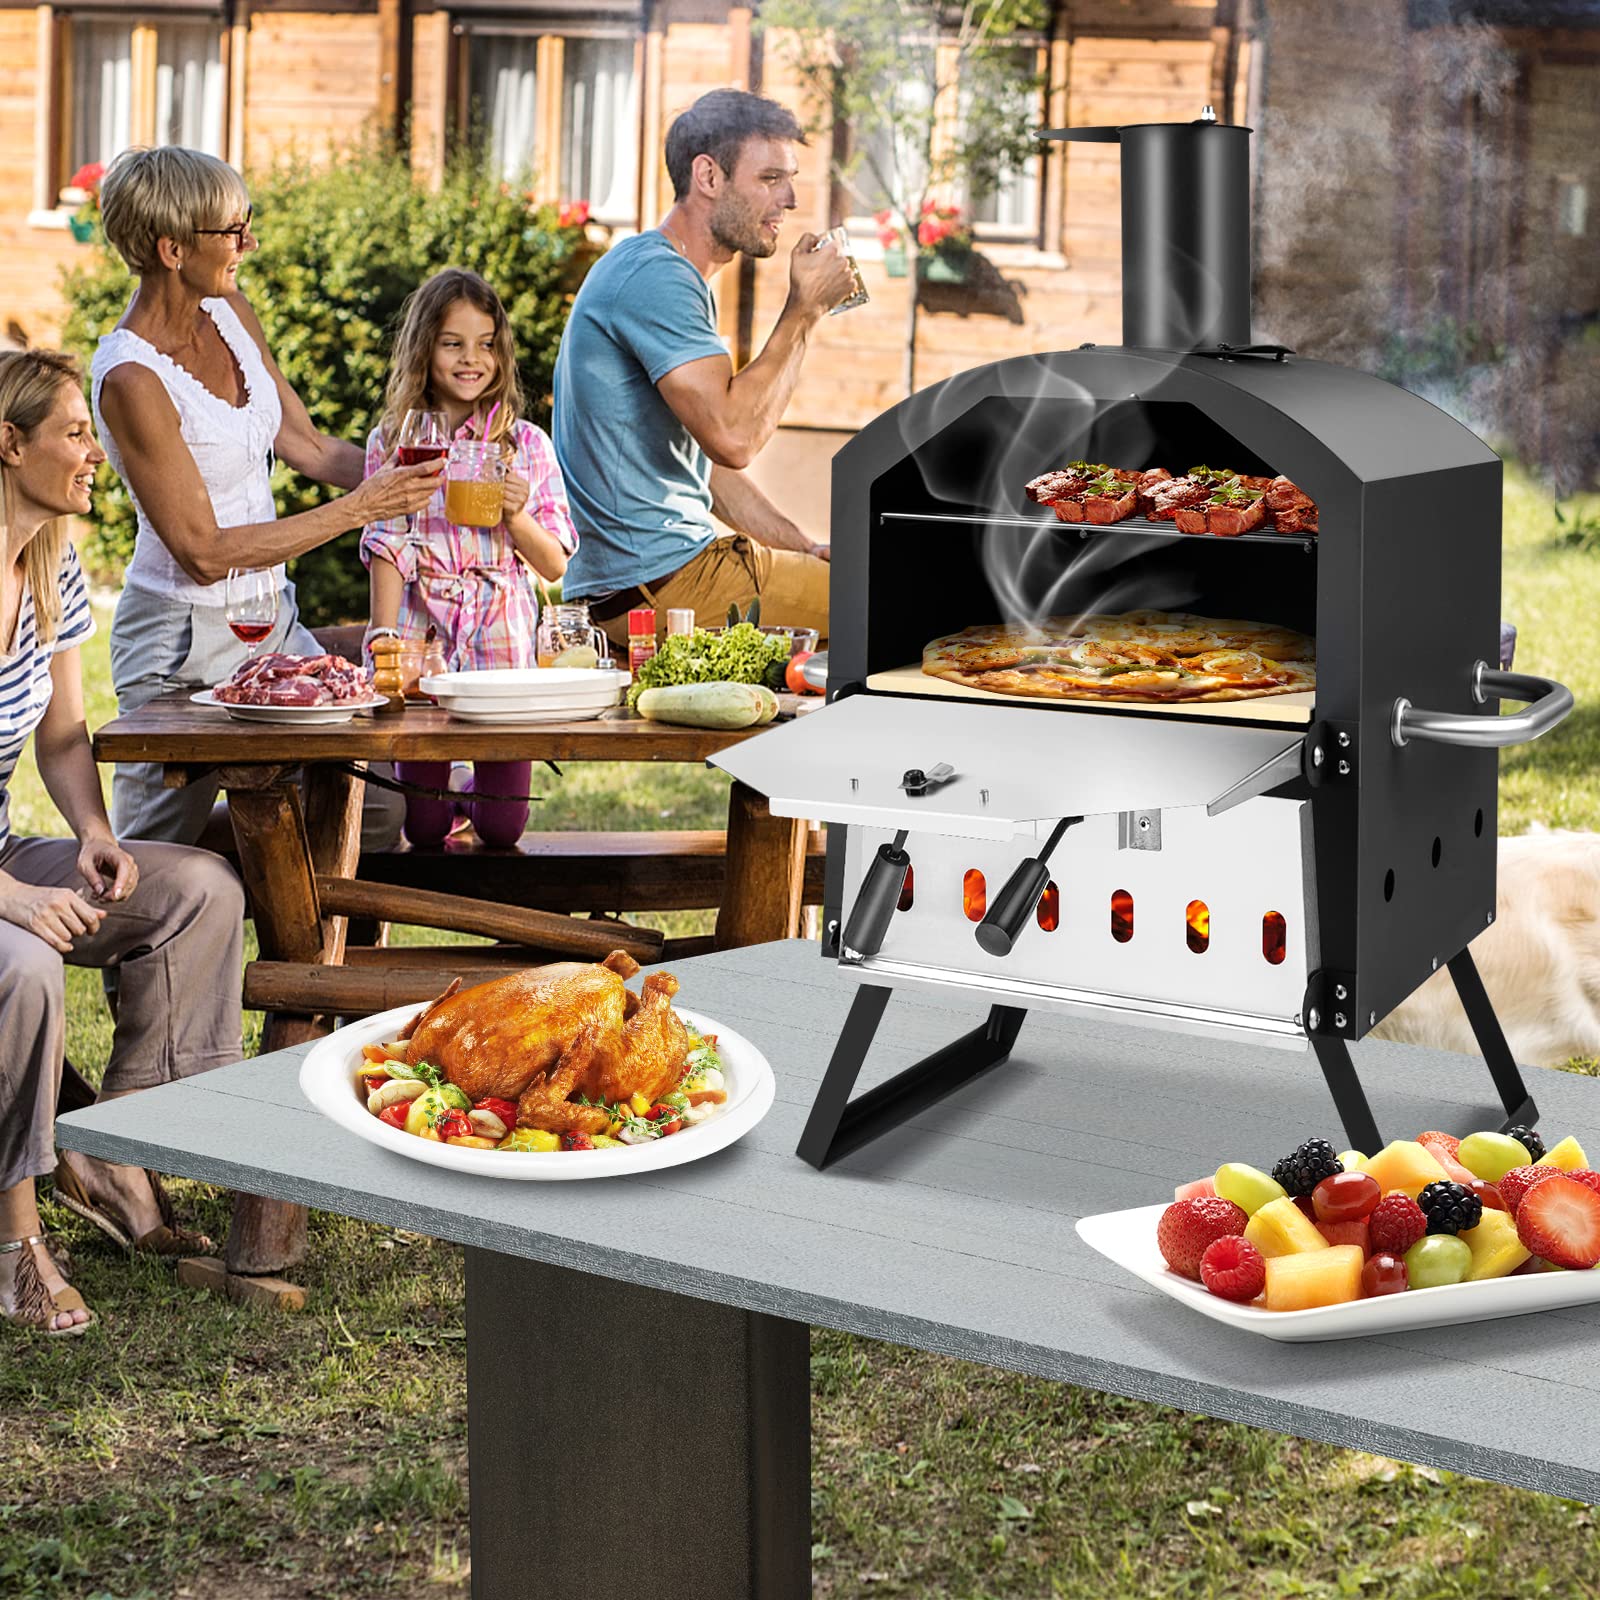 Giantex Outdoor Pizza Oven Wood Fired, 2-Layer Pizza Maker with Pizza Stone, Pizza Peel (Black)